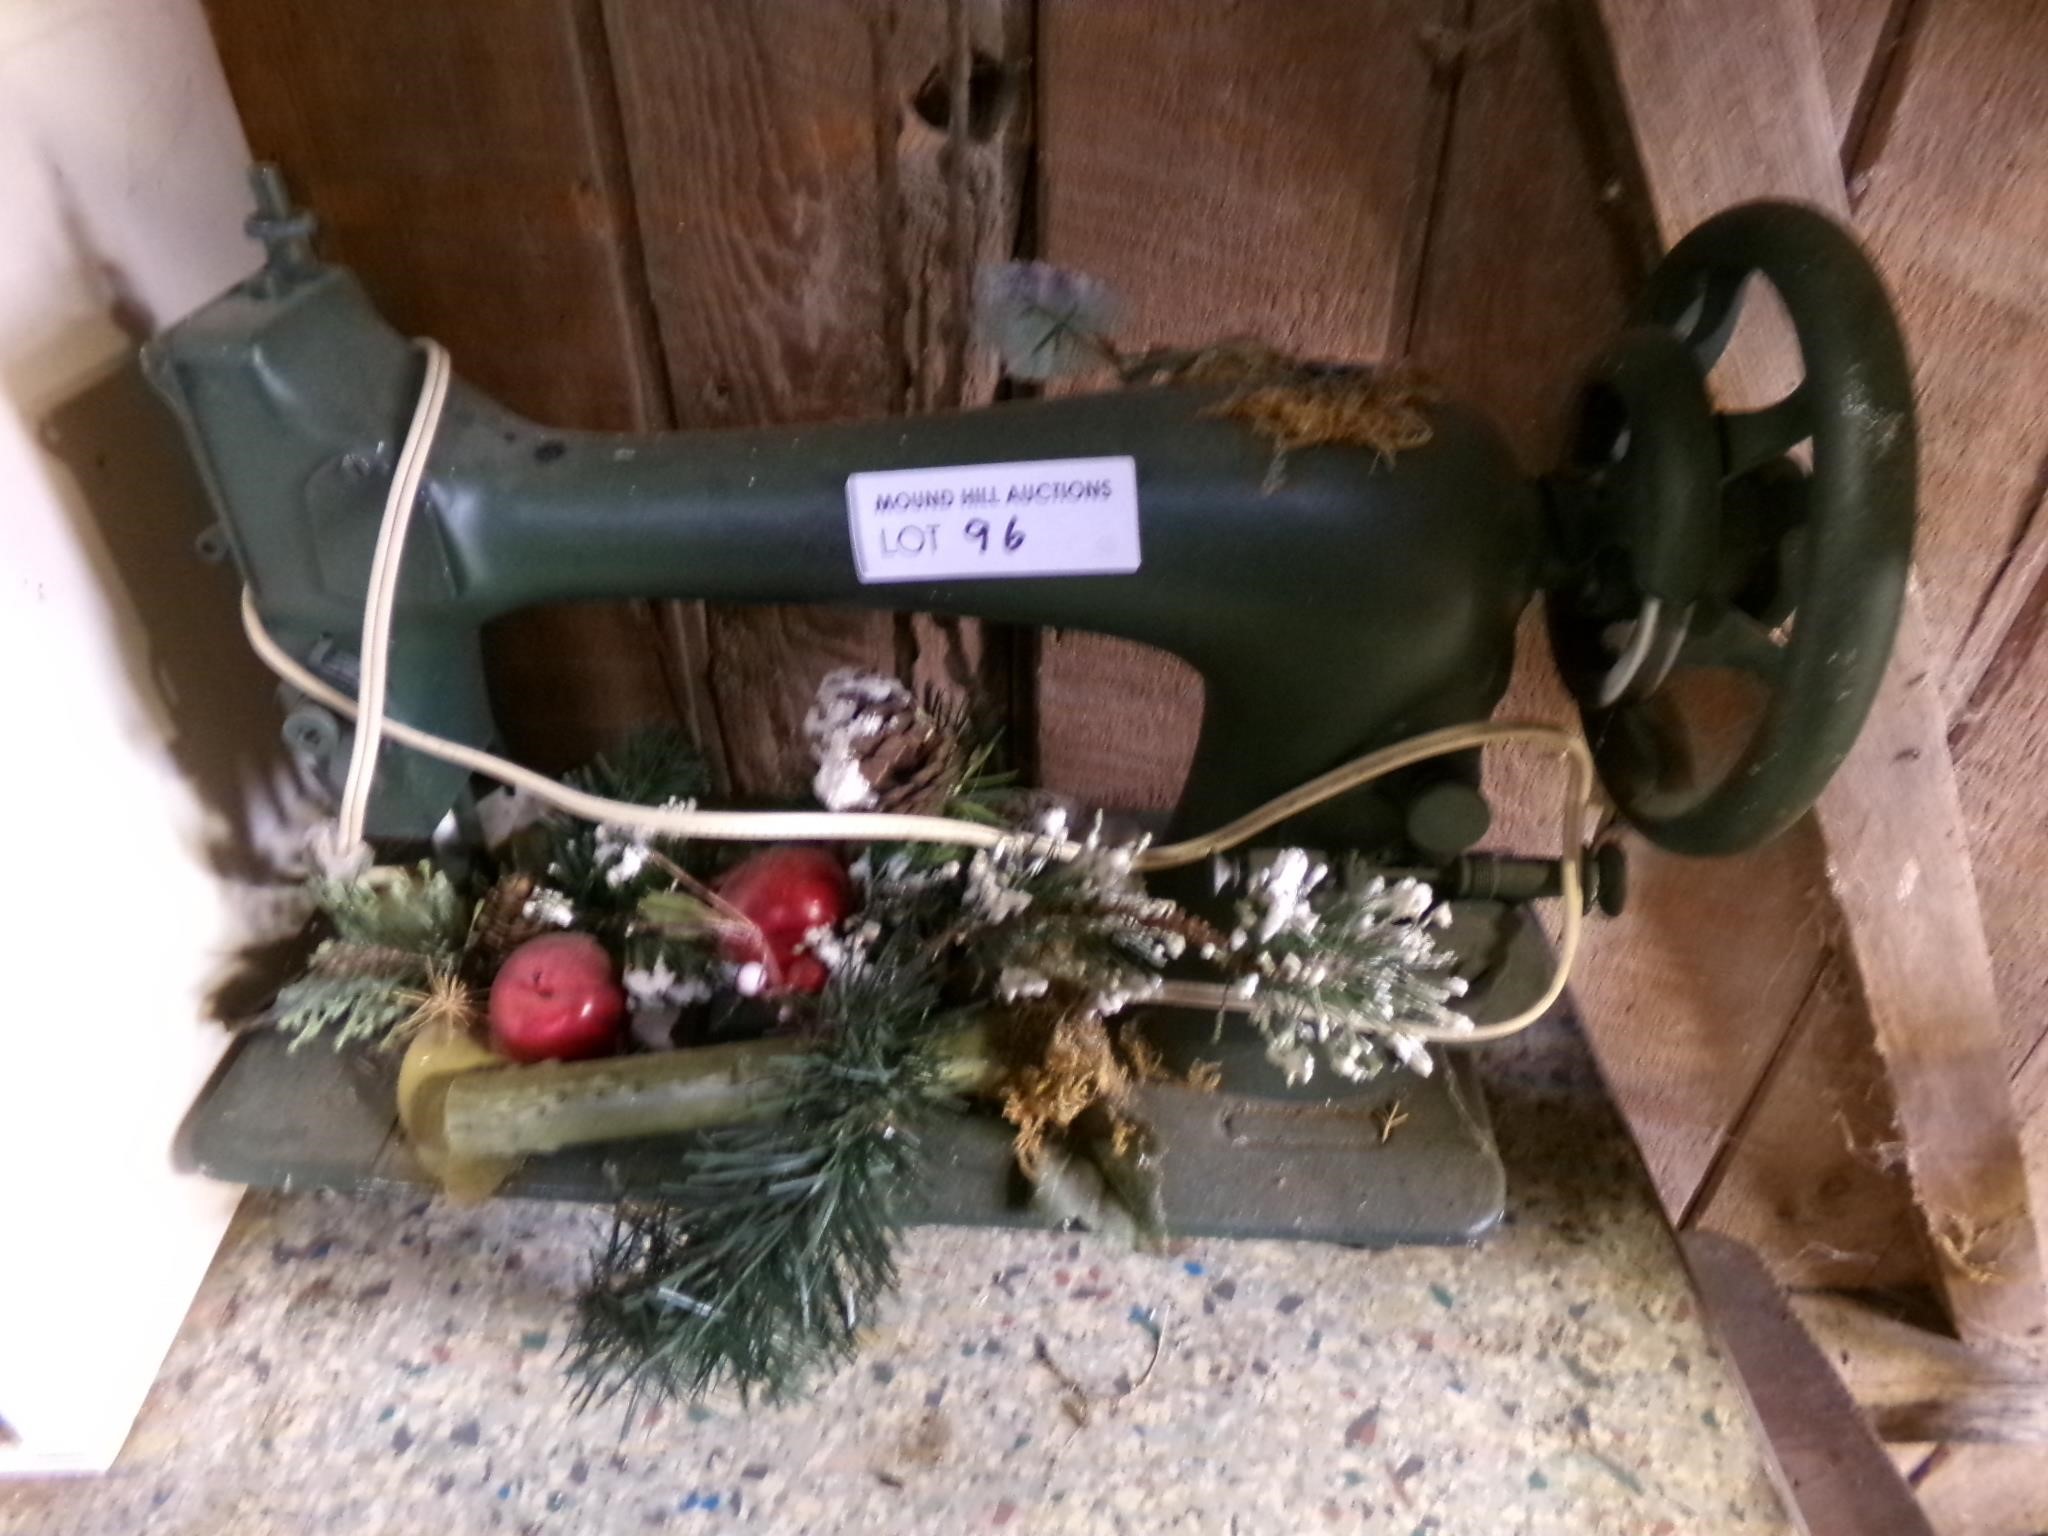 Old sewing machine, holiday decorated